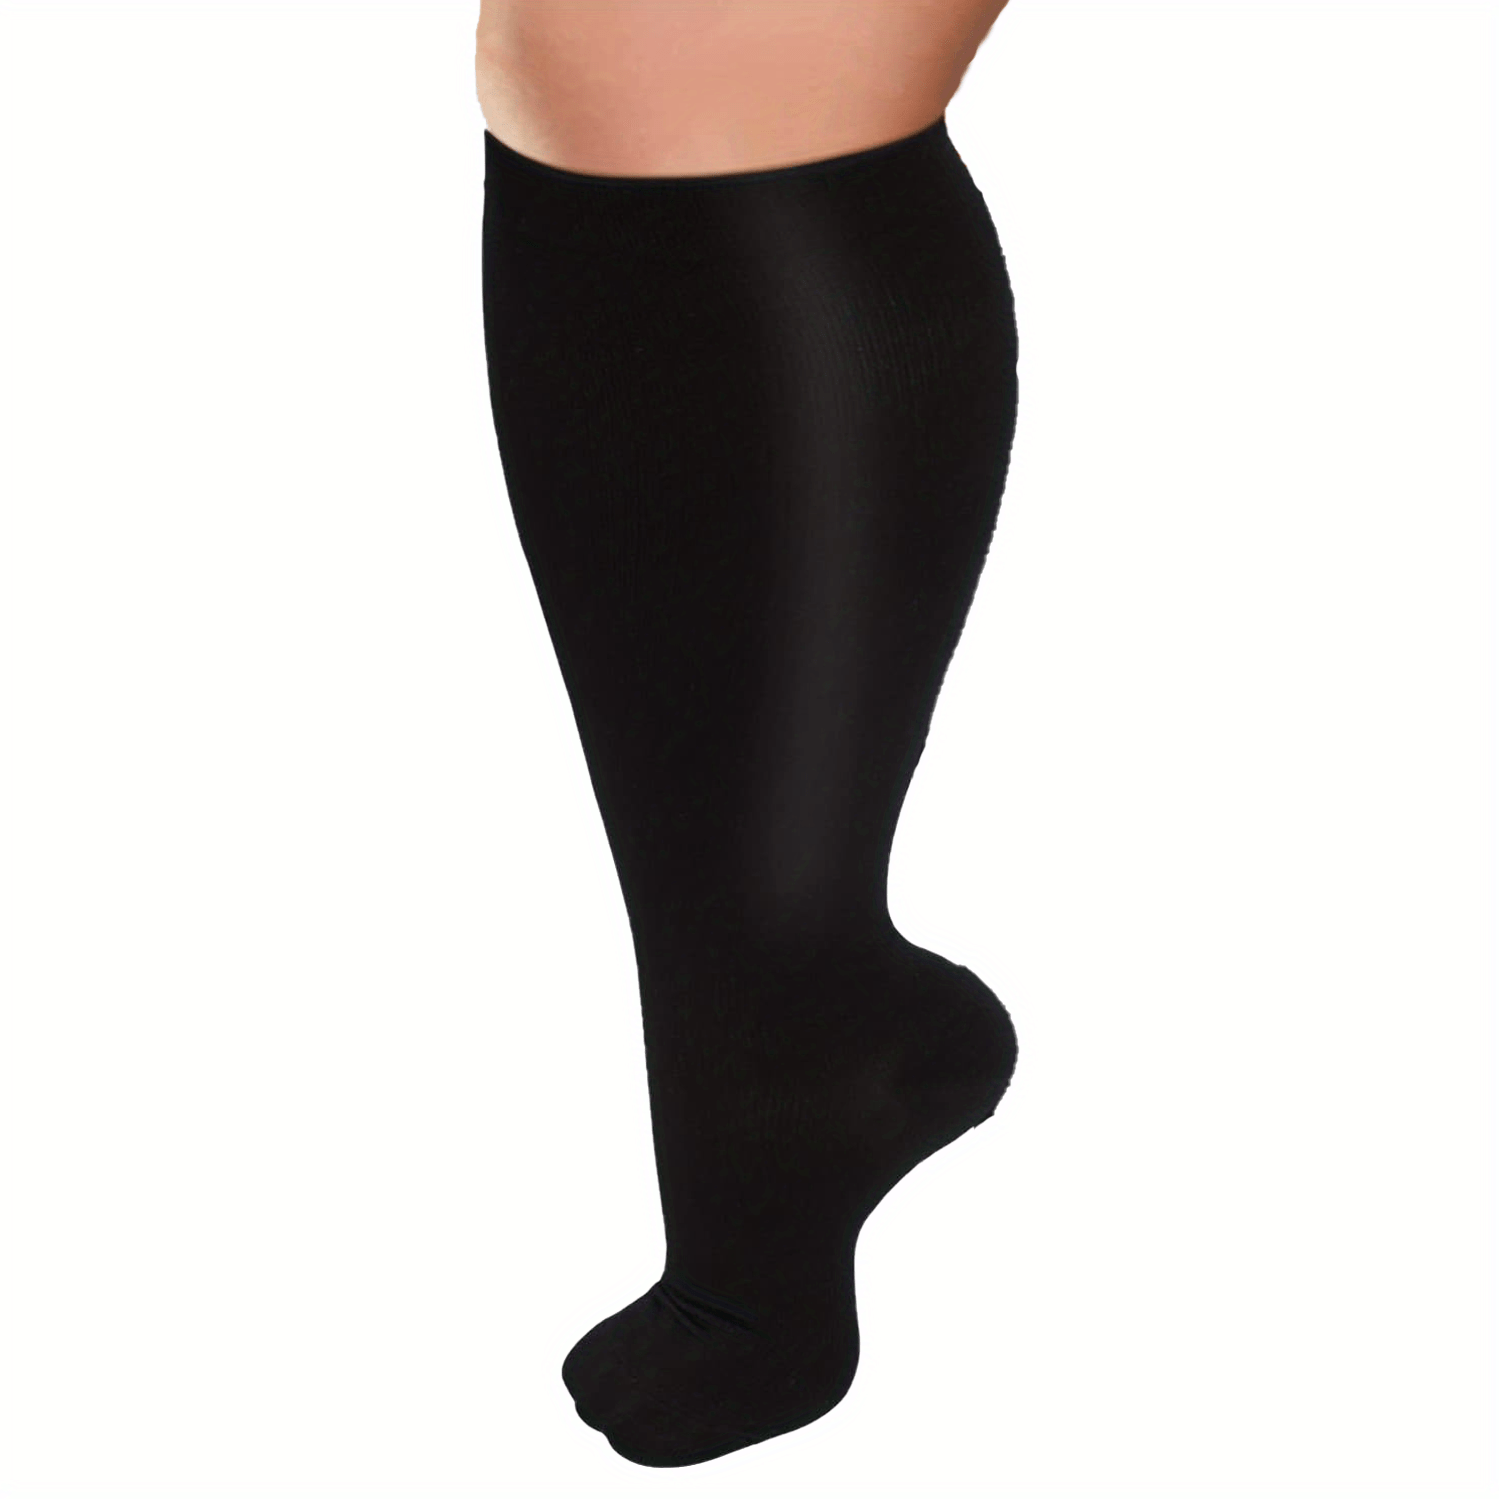 Boost Performance And Comfort With Plus Size Compression Socks For Women -  1/4 Pairs Unisex Knee High Stockings For Hiking, Running, And More!